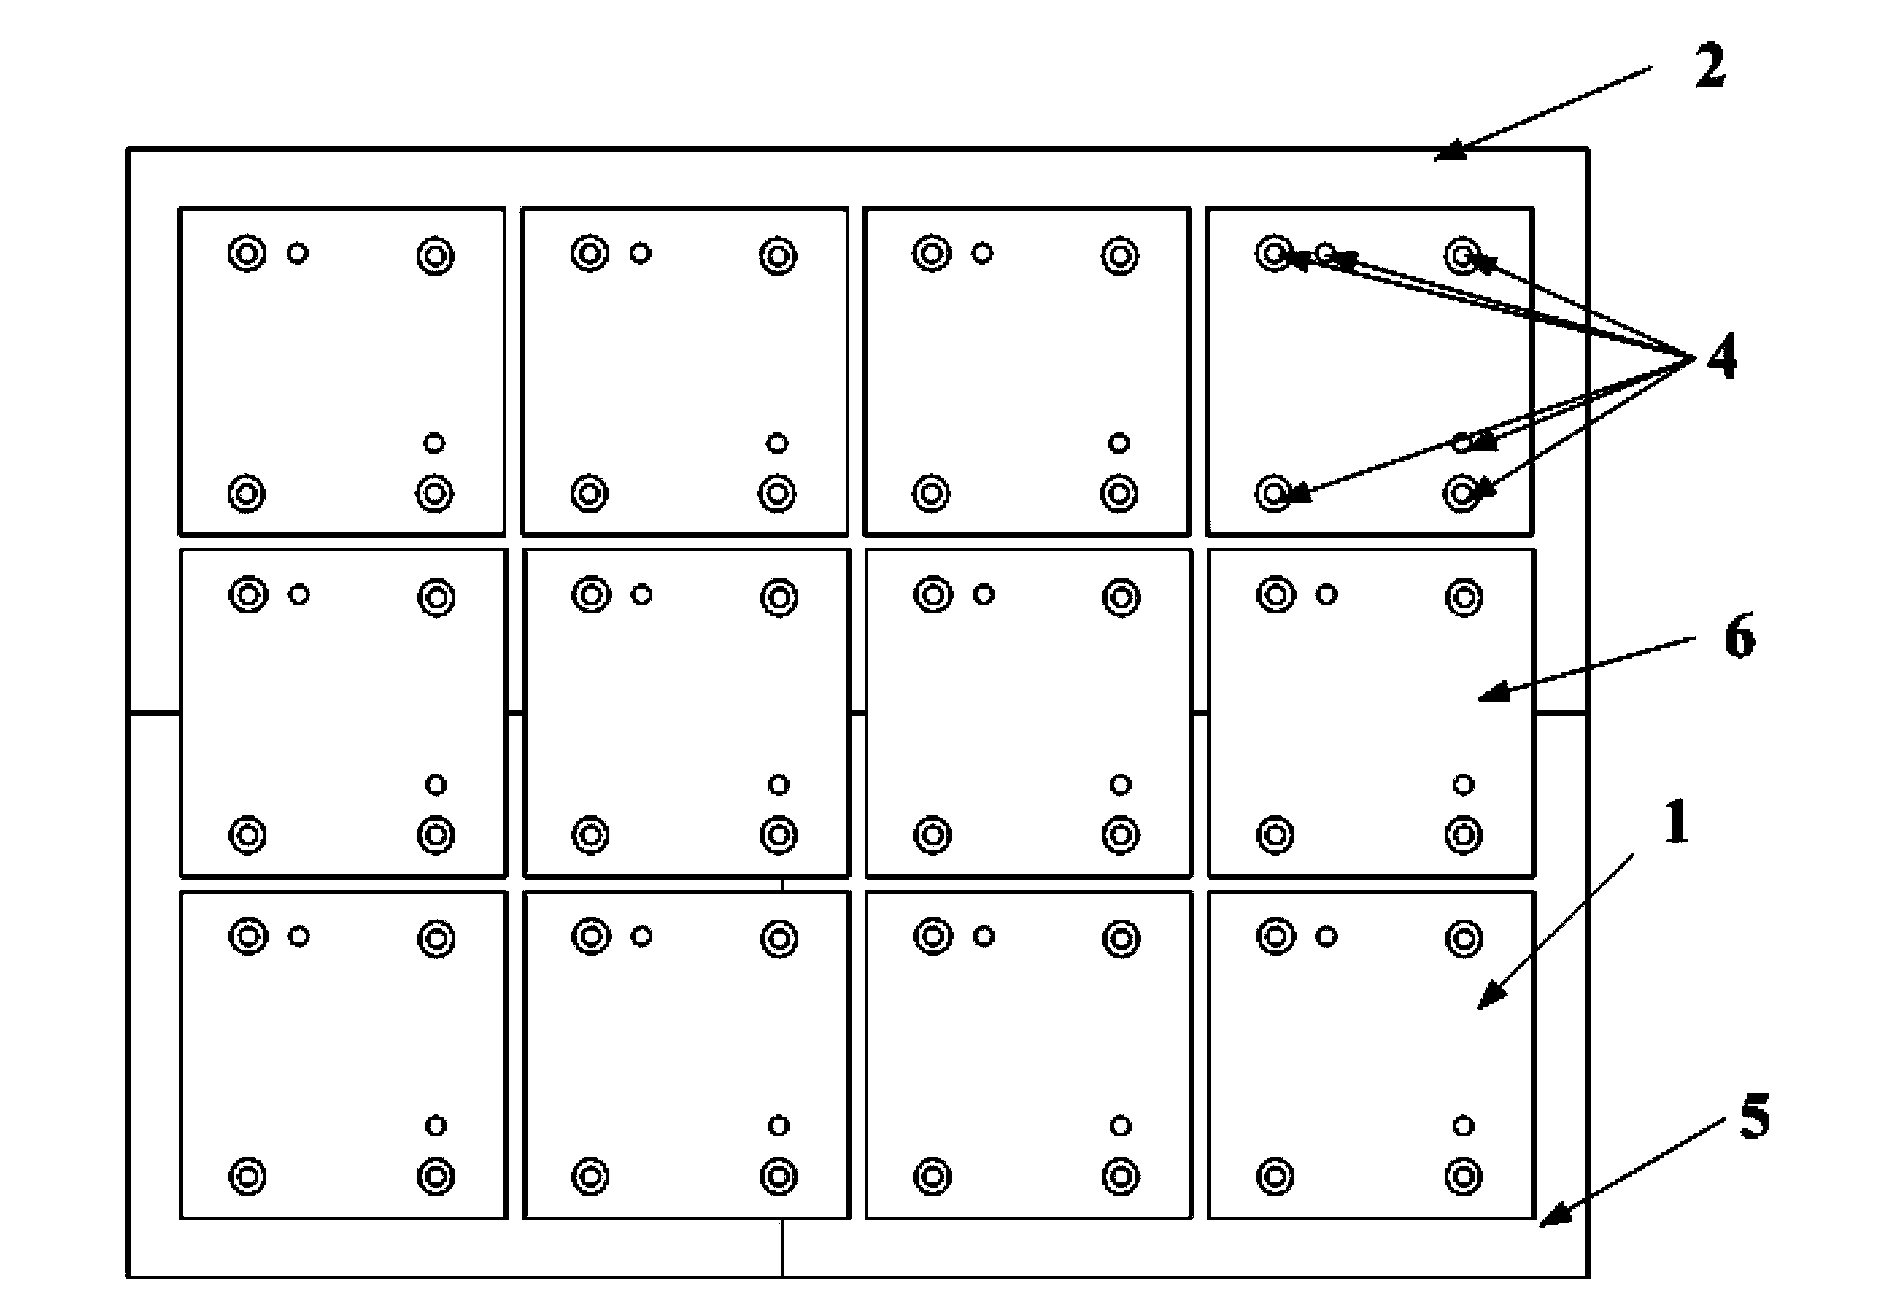 Common-caliber beam forming device for infrared rays/lasers/microwaves/millimeter waves